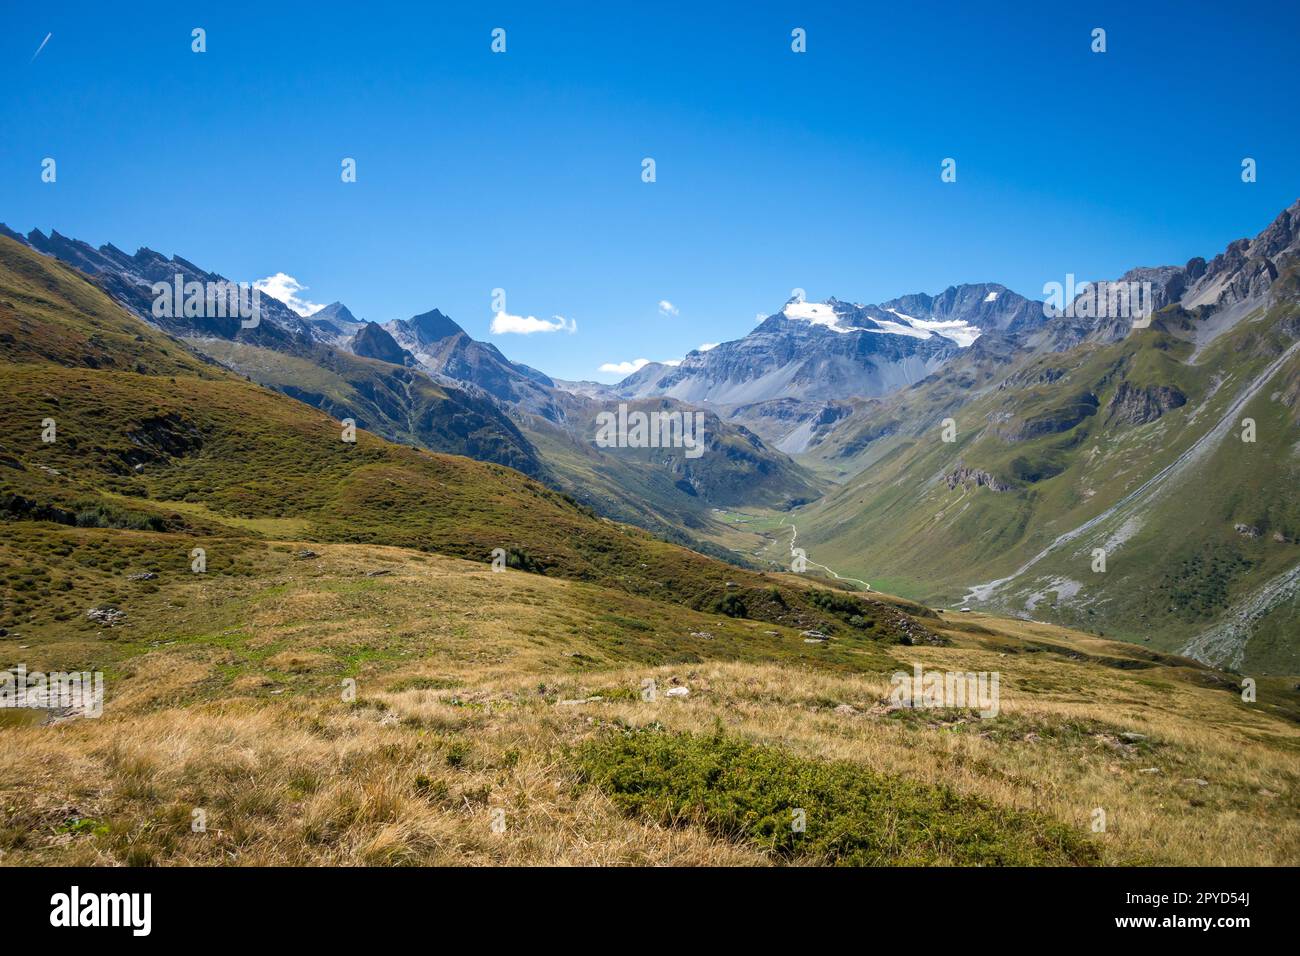 Alpine glaciers and mountains landscape in French alps Stock Photo